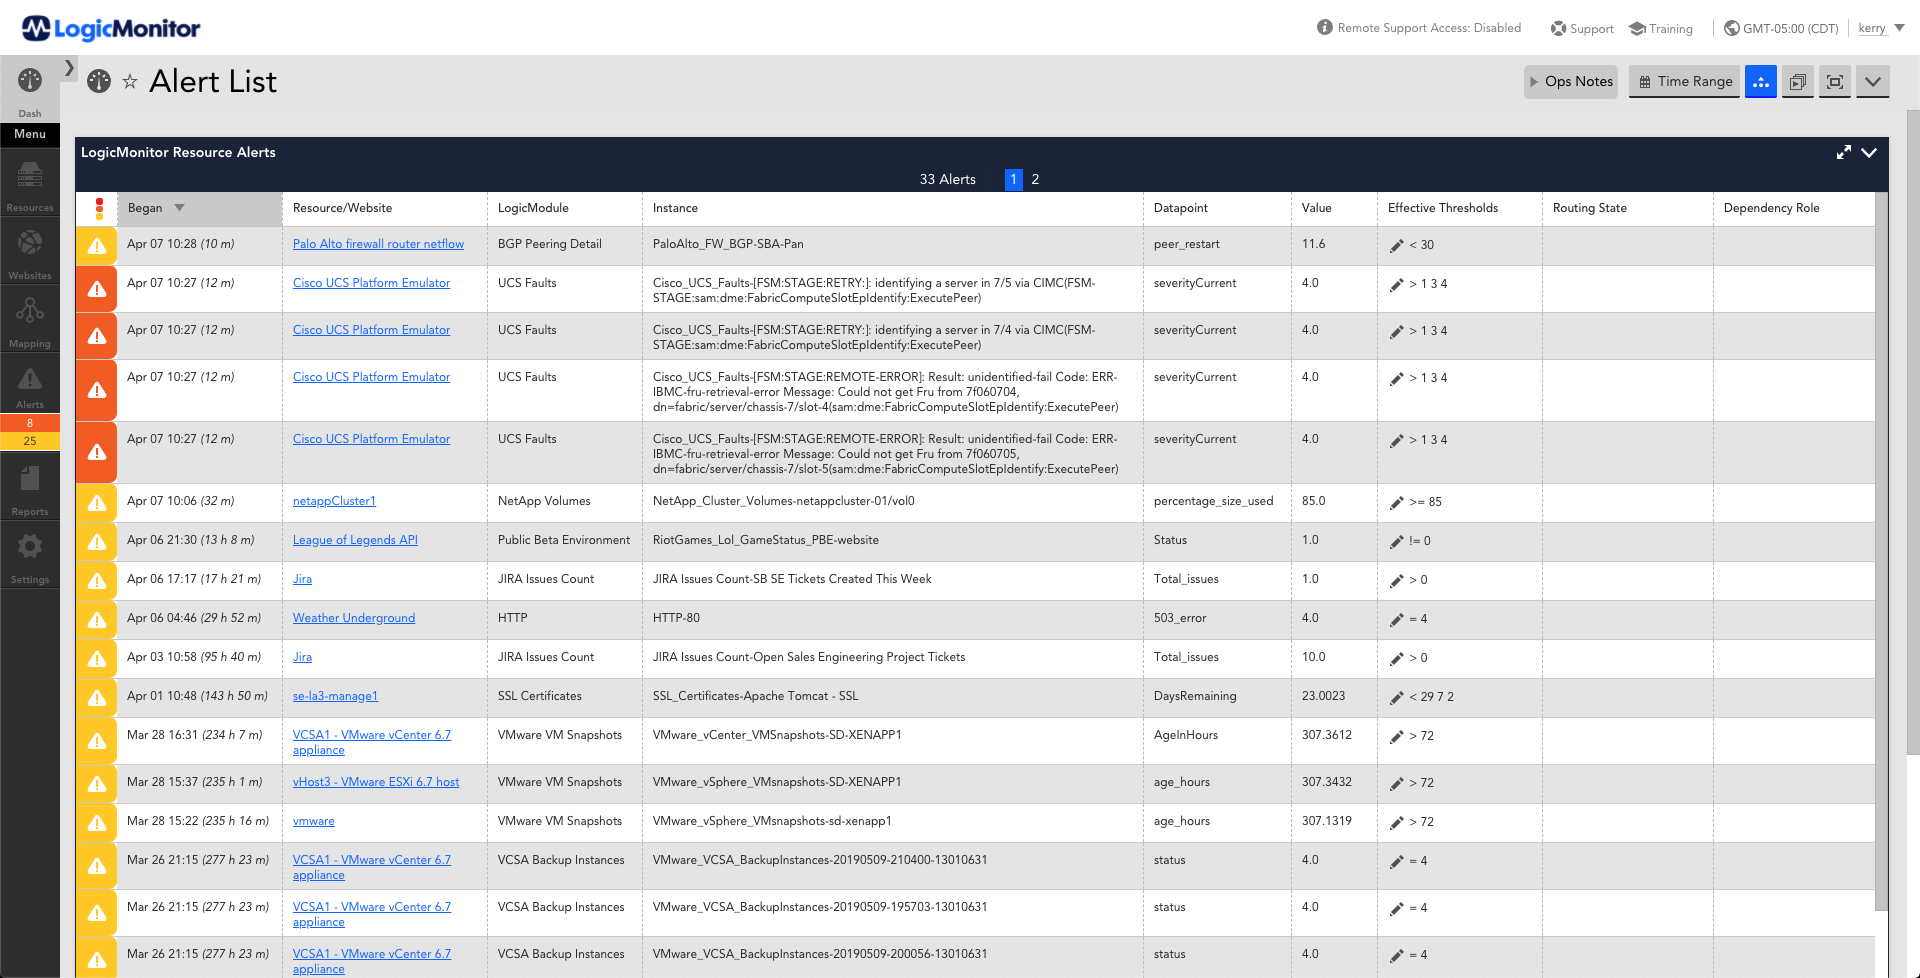 This dashboard provides a list of all alerts currently triggered on the LogicMonitor environment